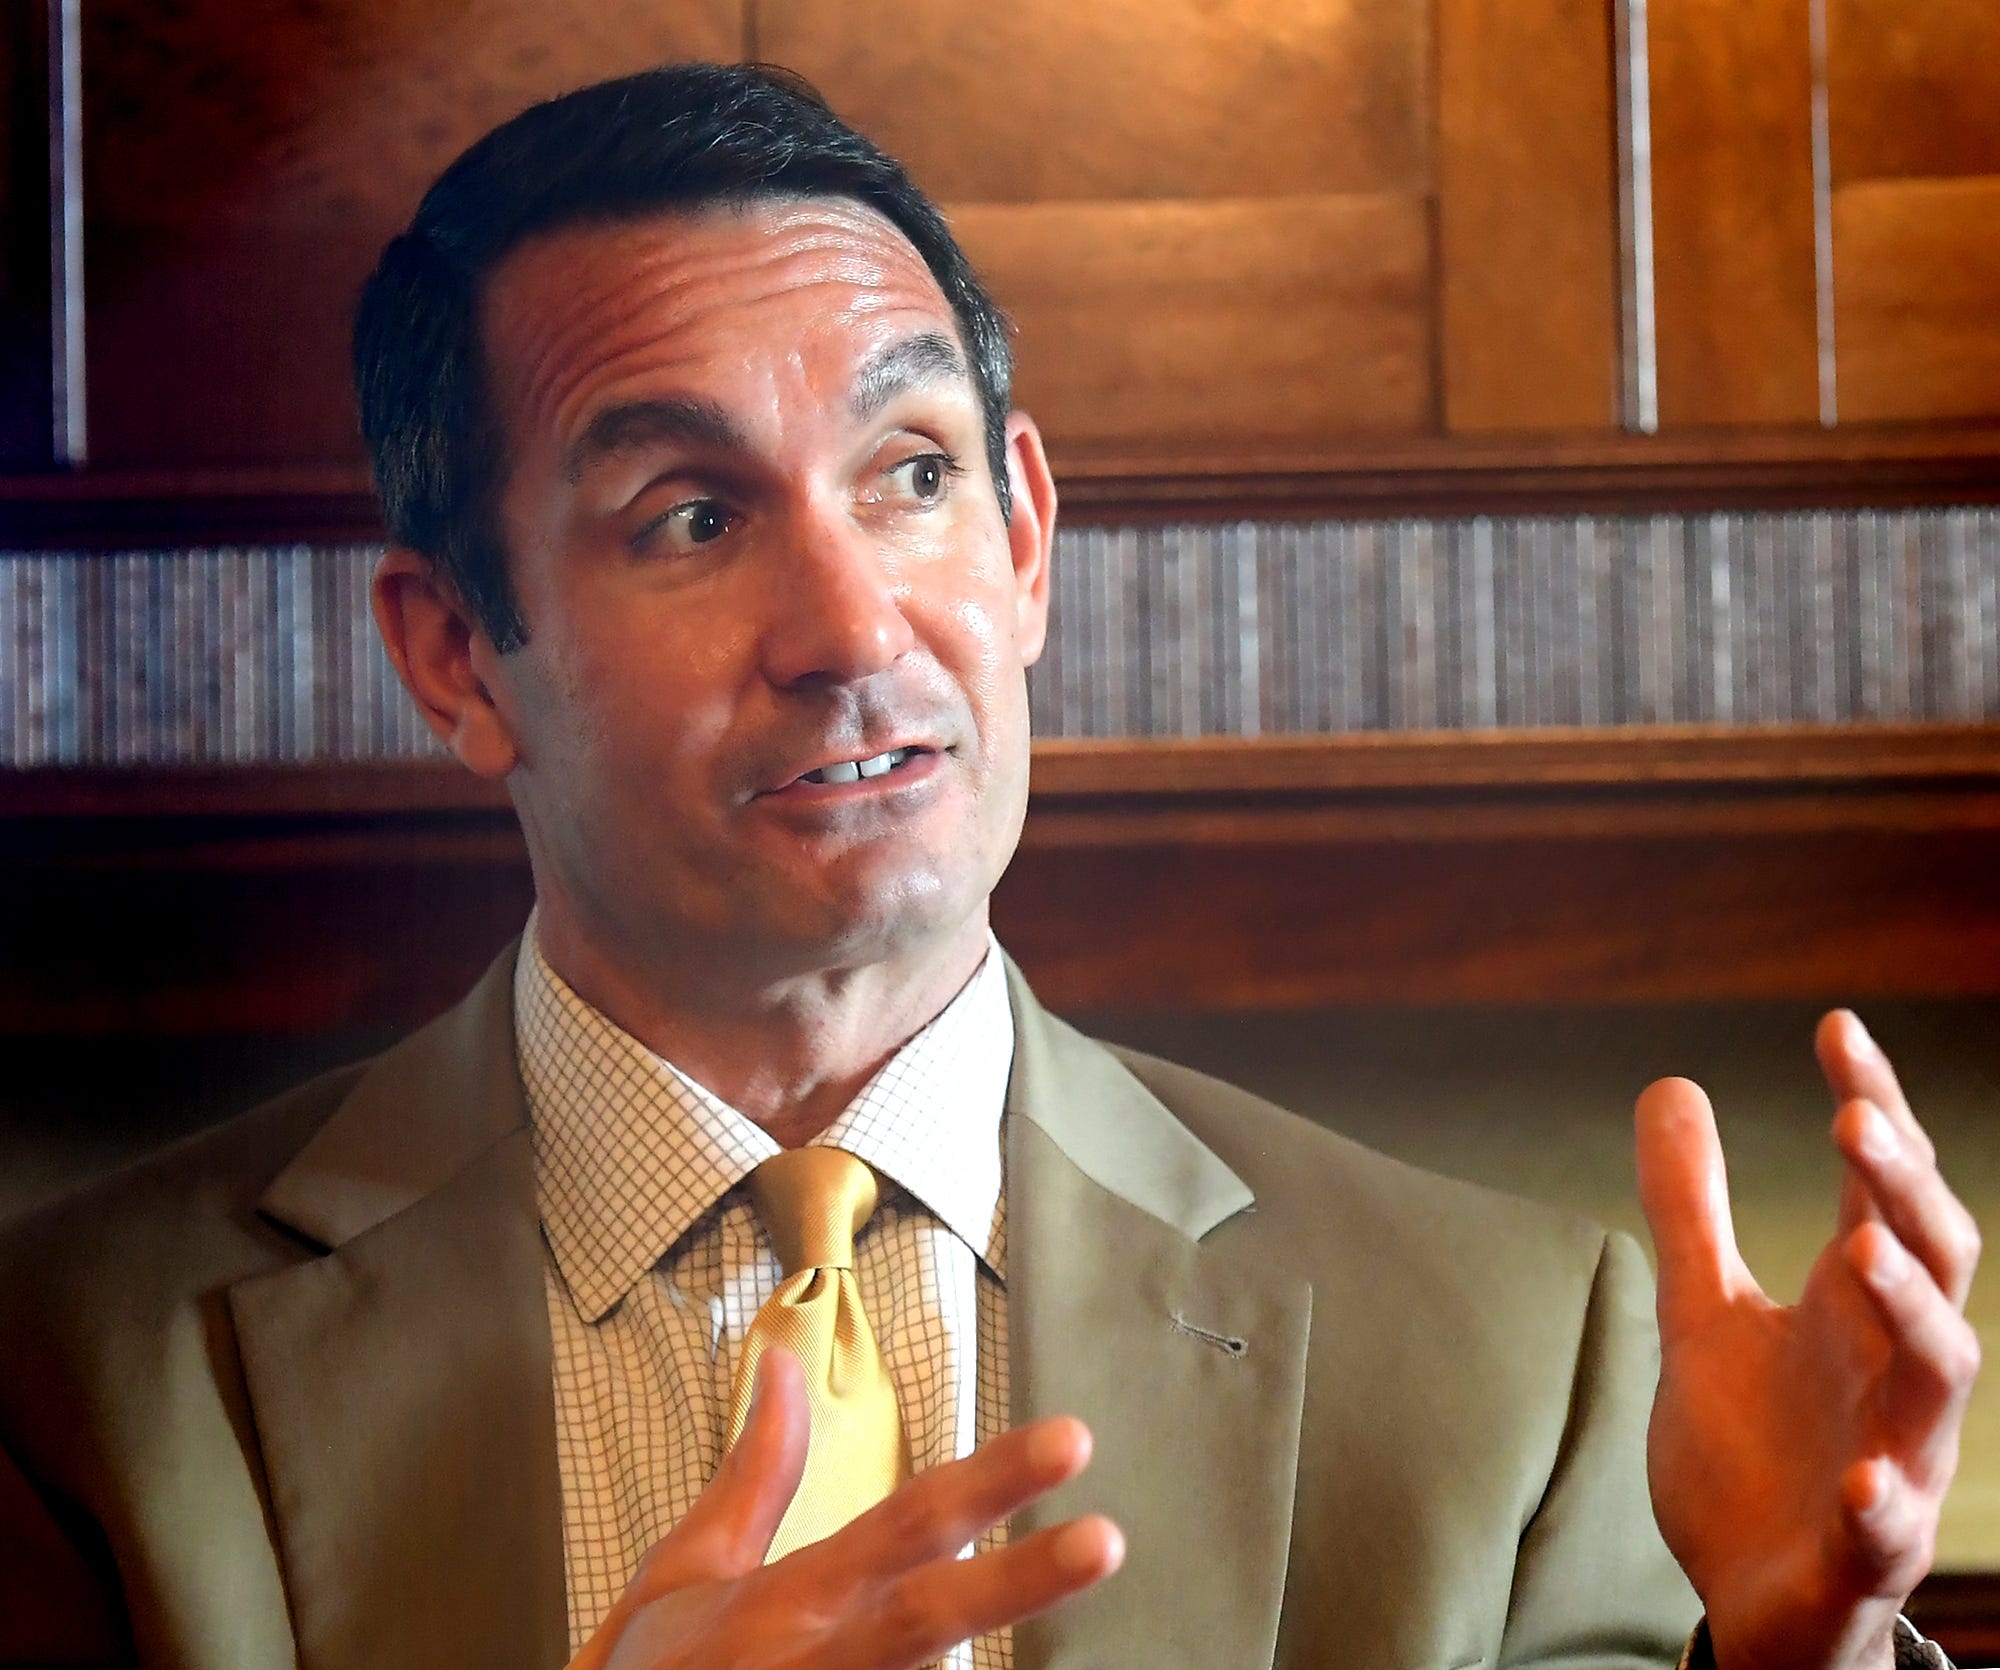 Pennsylvania Auditor General Eugene DePasquale speaks to media, Wednesday, Oct. 7, 2020, after he appeared at a Rotary Club of York program featuring the candidates for the 10th Congressional District at the Country Club of York. Congressman Scott Perry, his opponent, appeared in the program last month. Bill Kalina photo